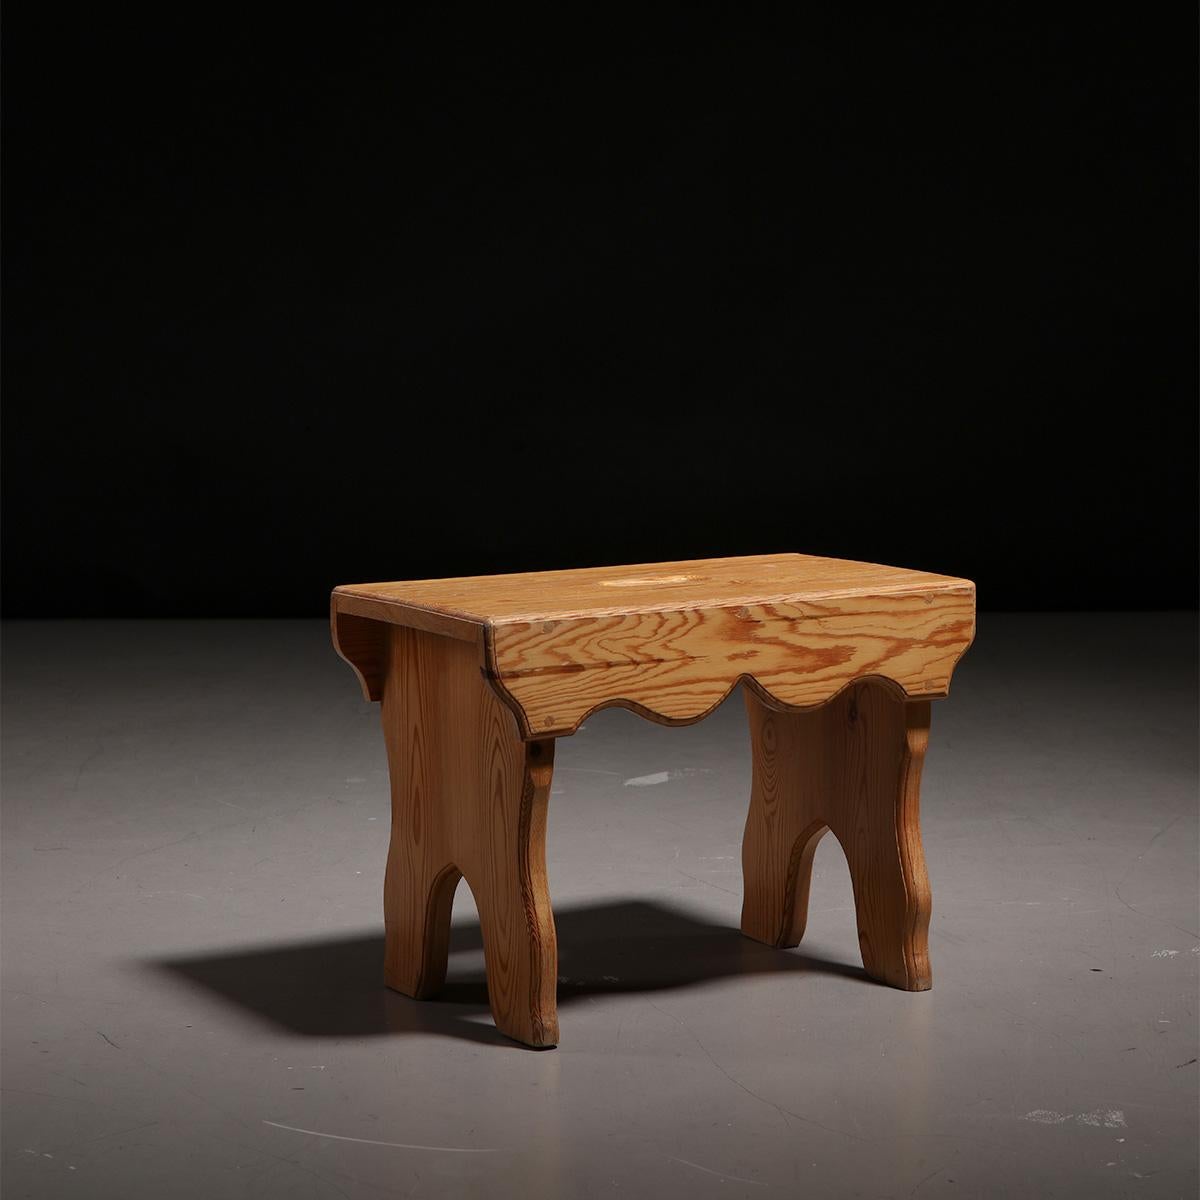 Scandinavian sculptural pine stool or small side table, made in Sweden, 1940s.

This wooden stool or small side table is unique and sculptural in its design due to the form of the legs and seat, all made out of pine wood featuring beautiful signs of